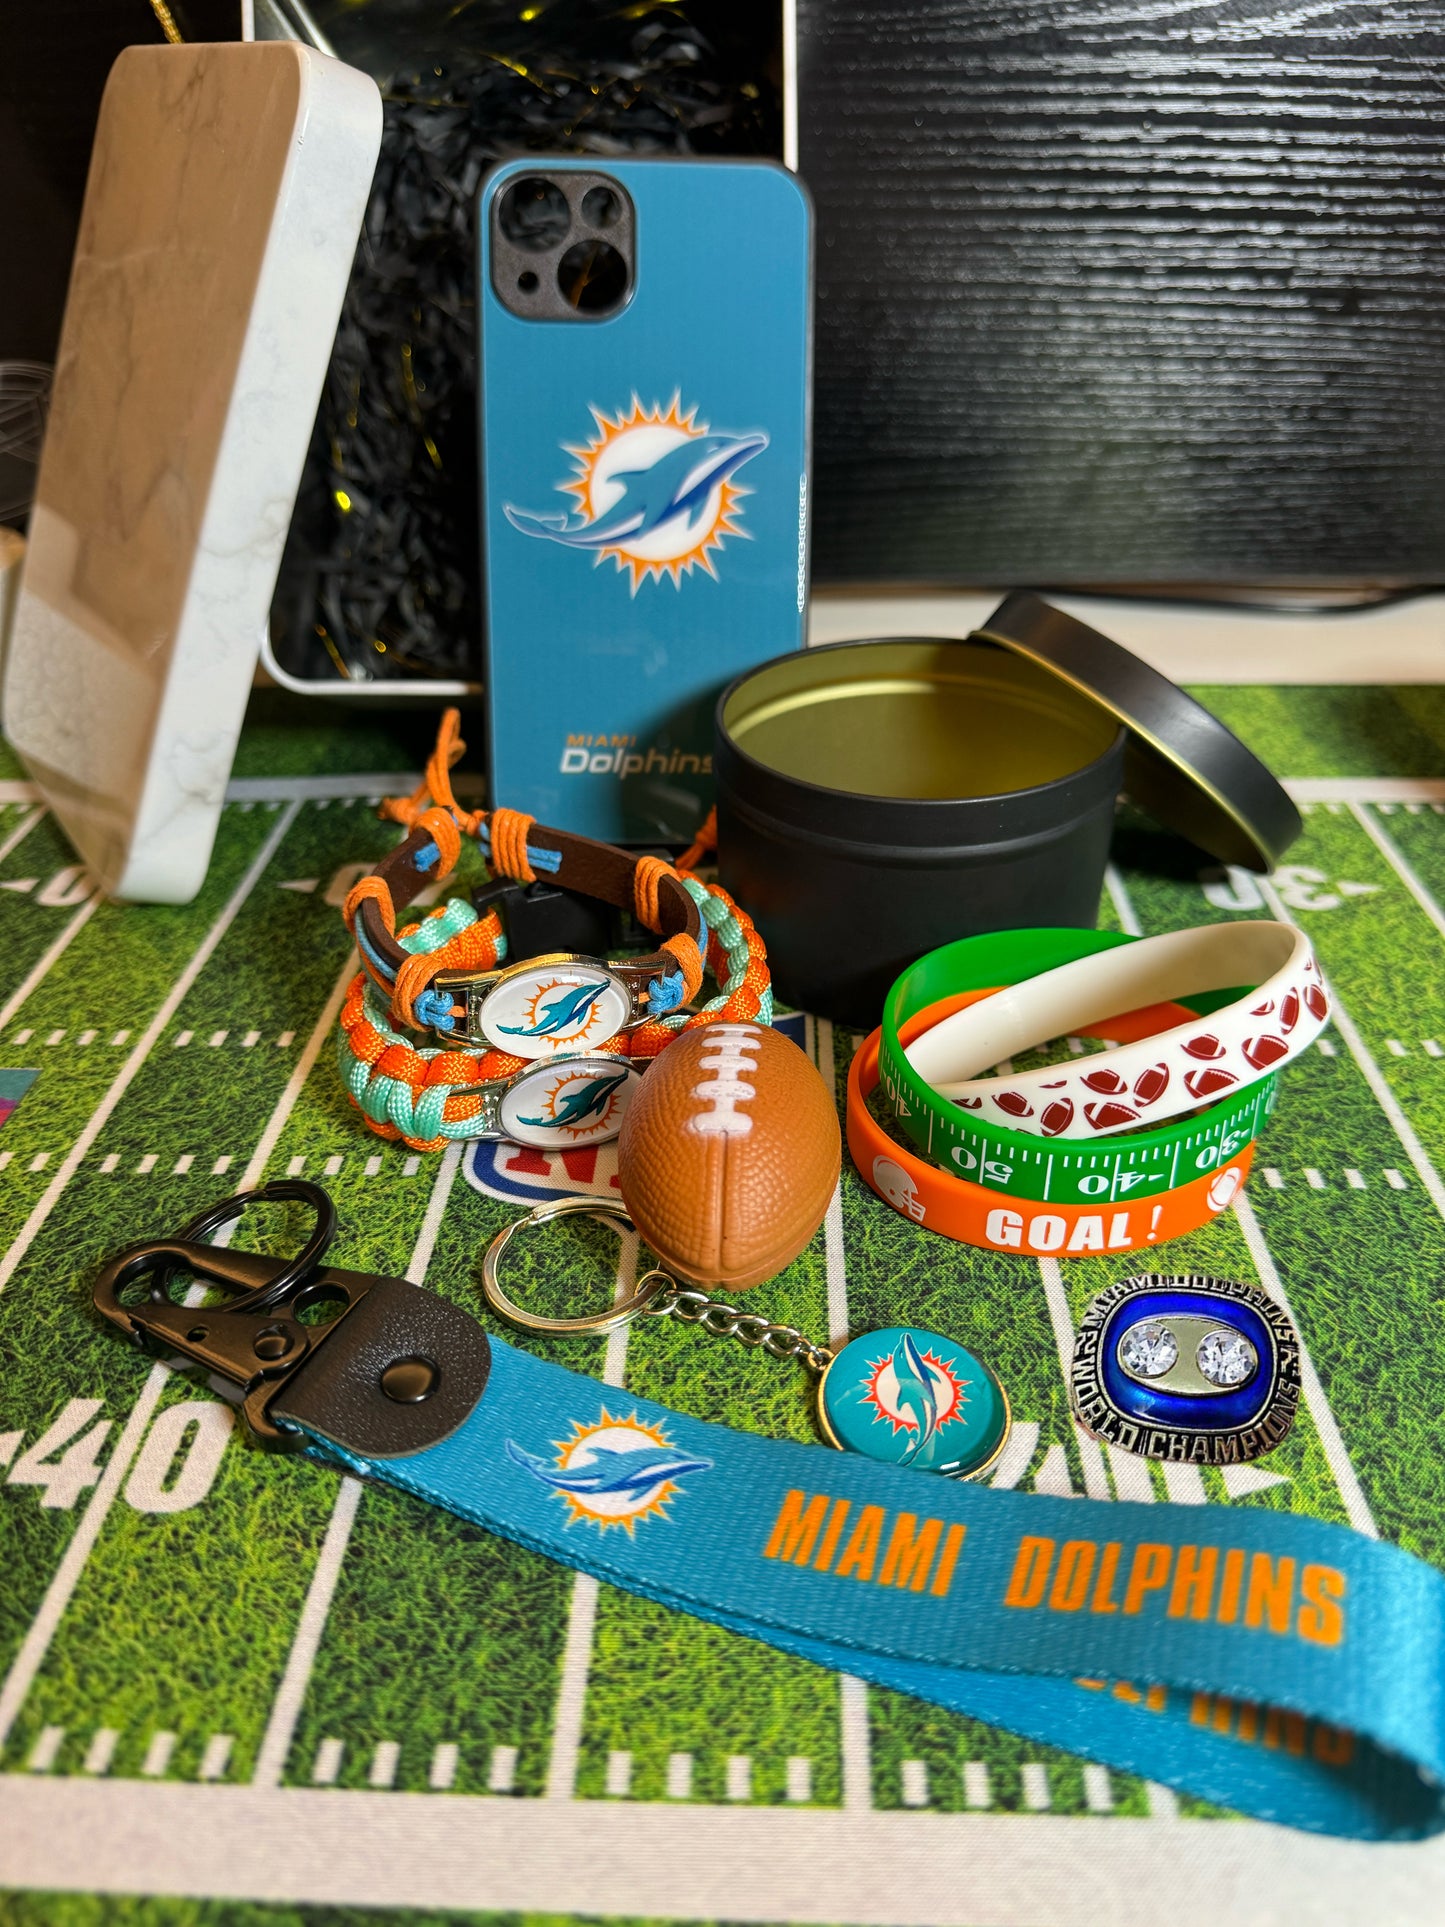 Dolphins Gift Box（10% off your order！！！）